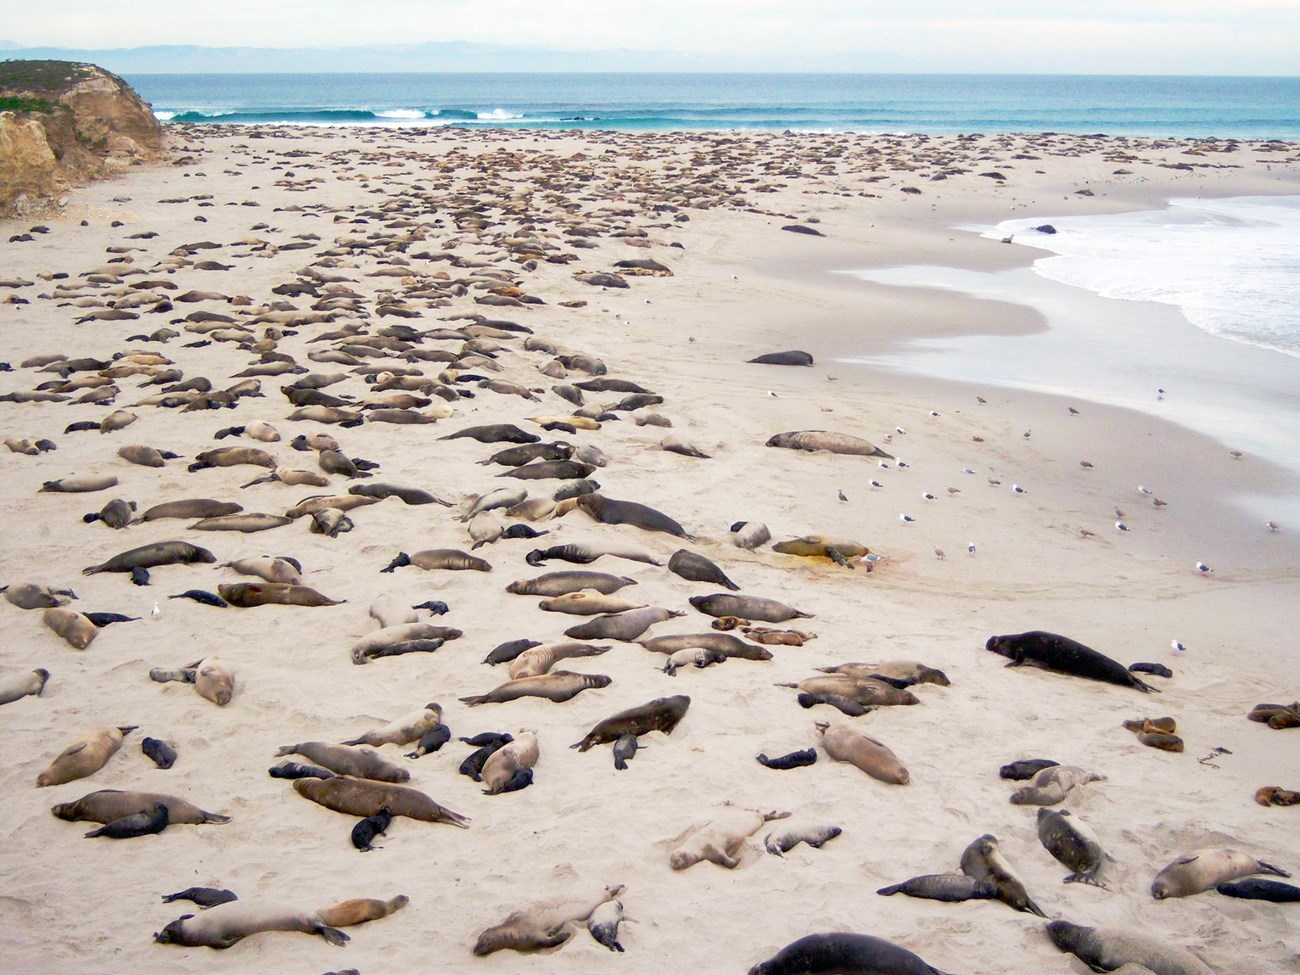 Overview of a beach covered in elephant seals, including many elephant seal pups